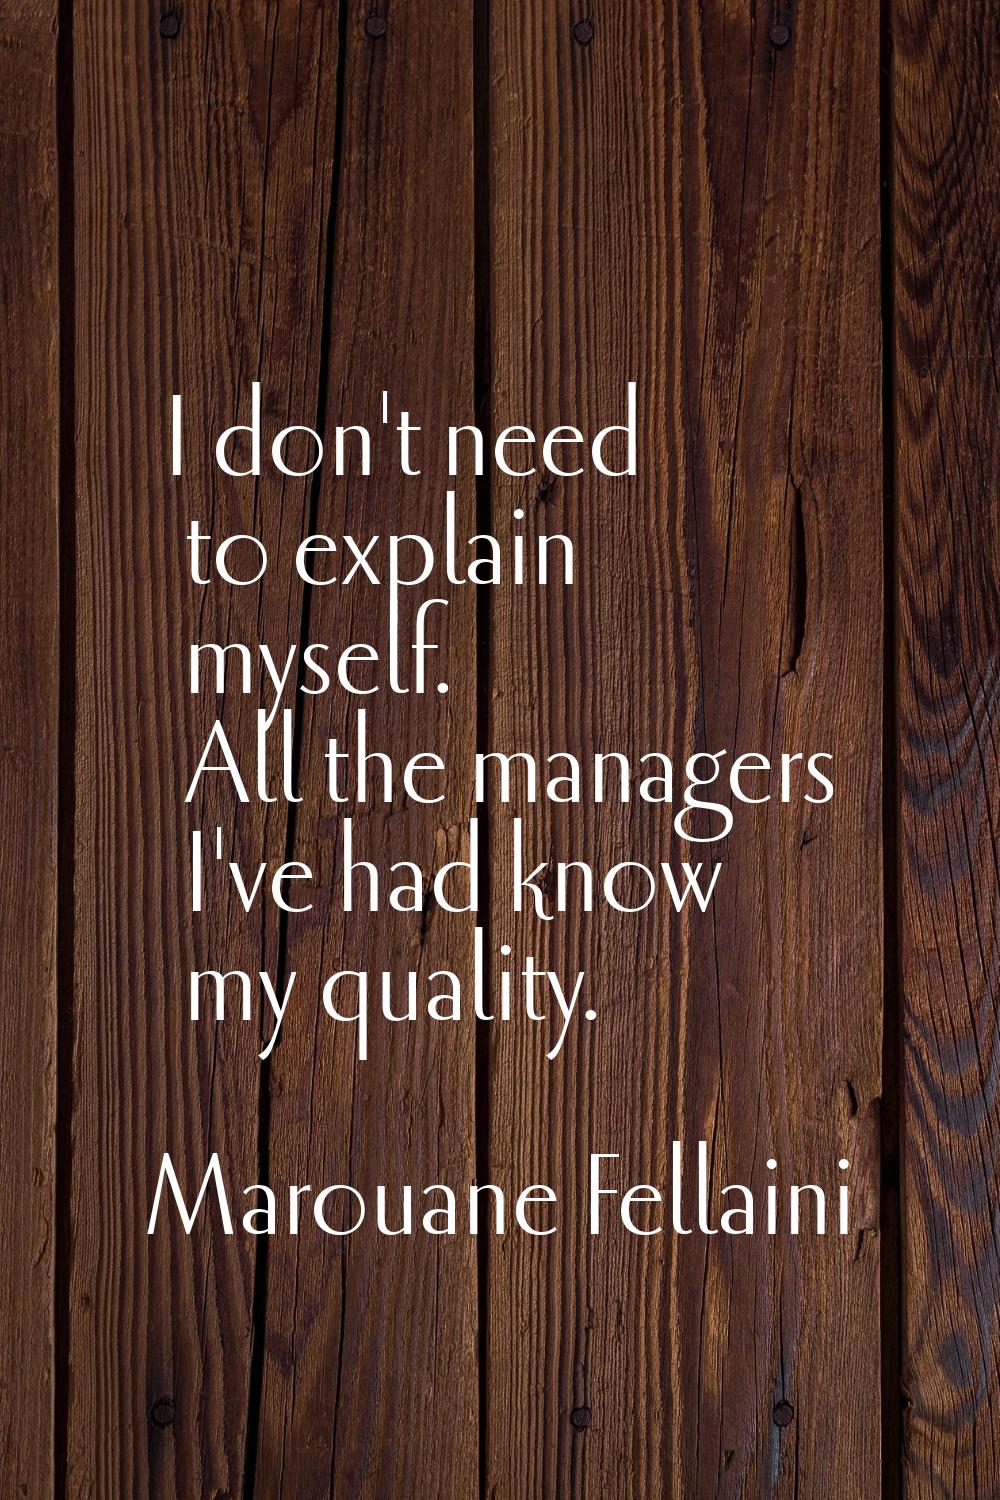 I don't need to explain myself. All the managers I've had know my quality.